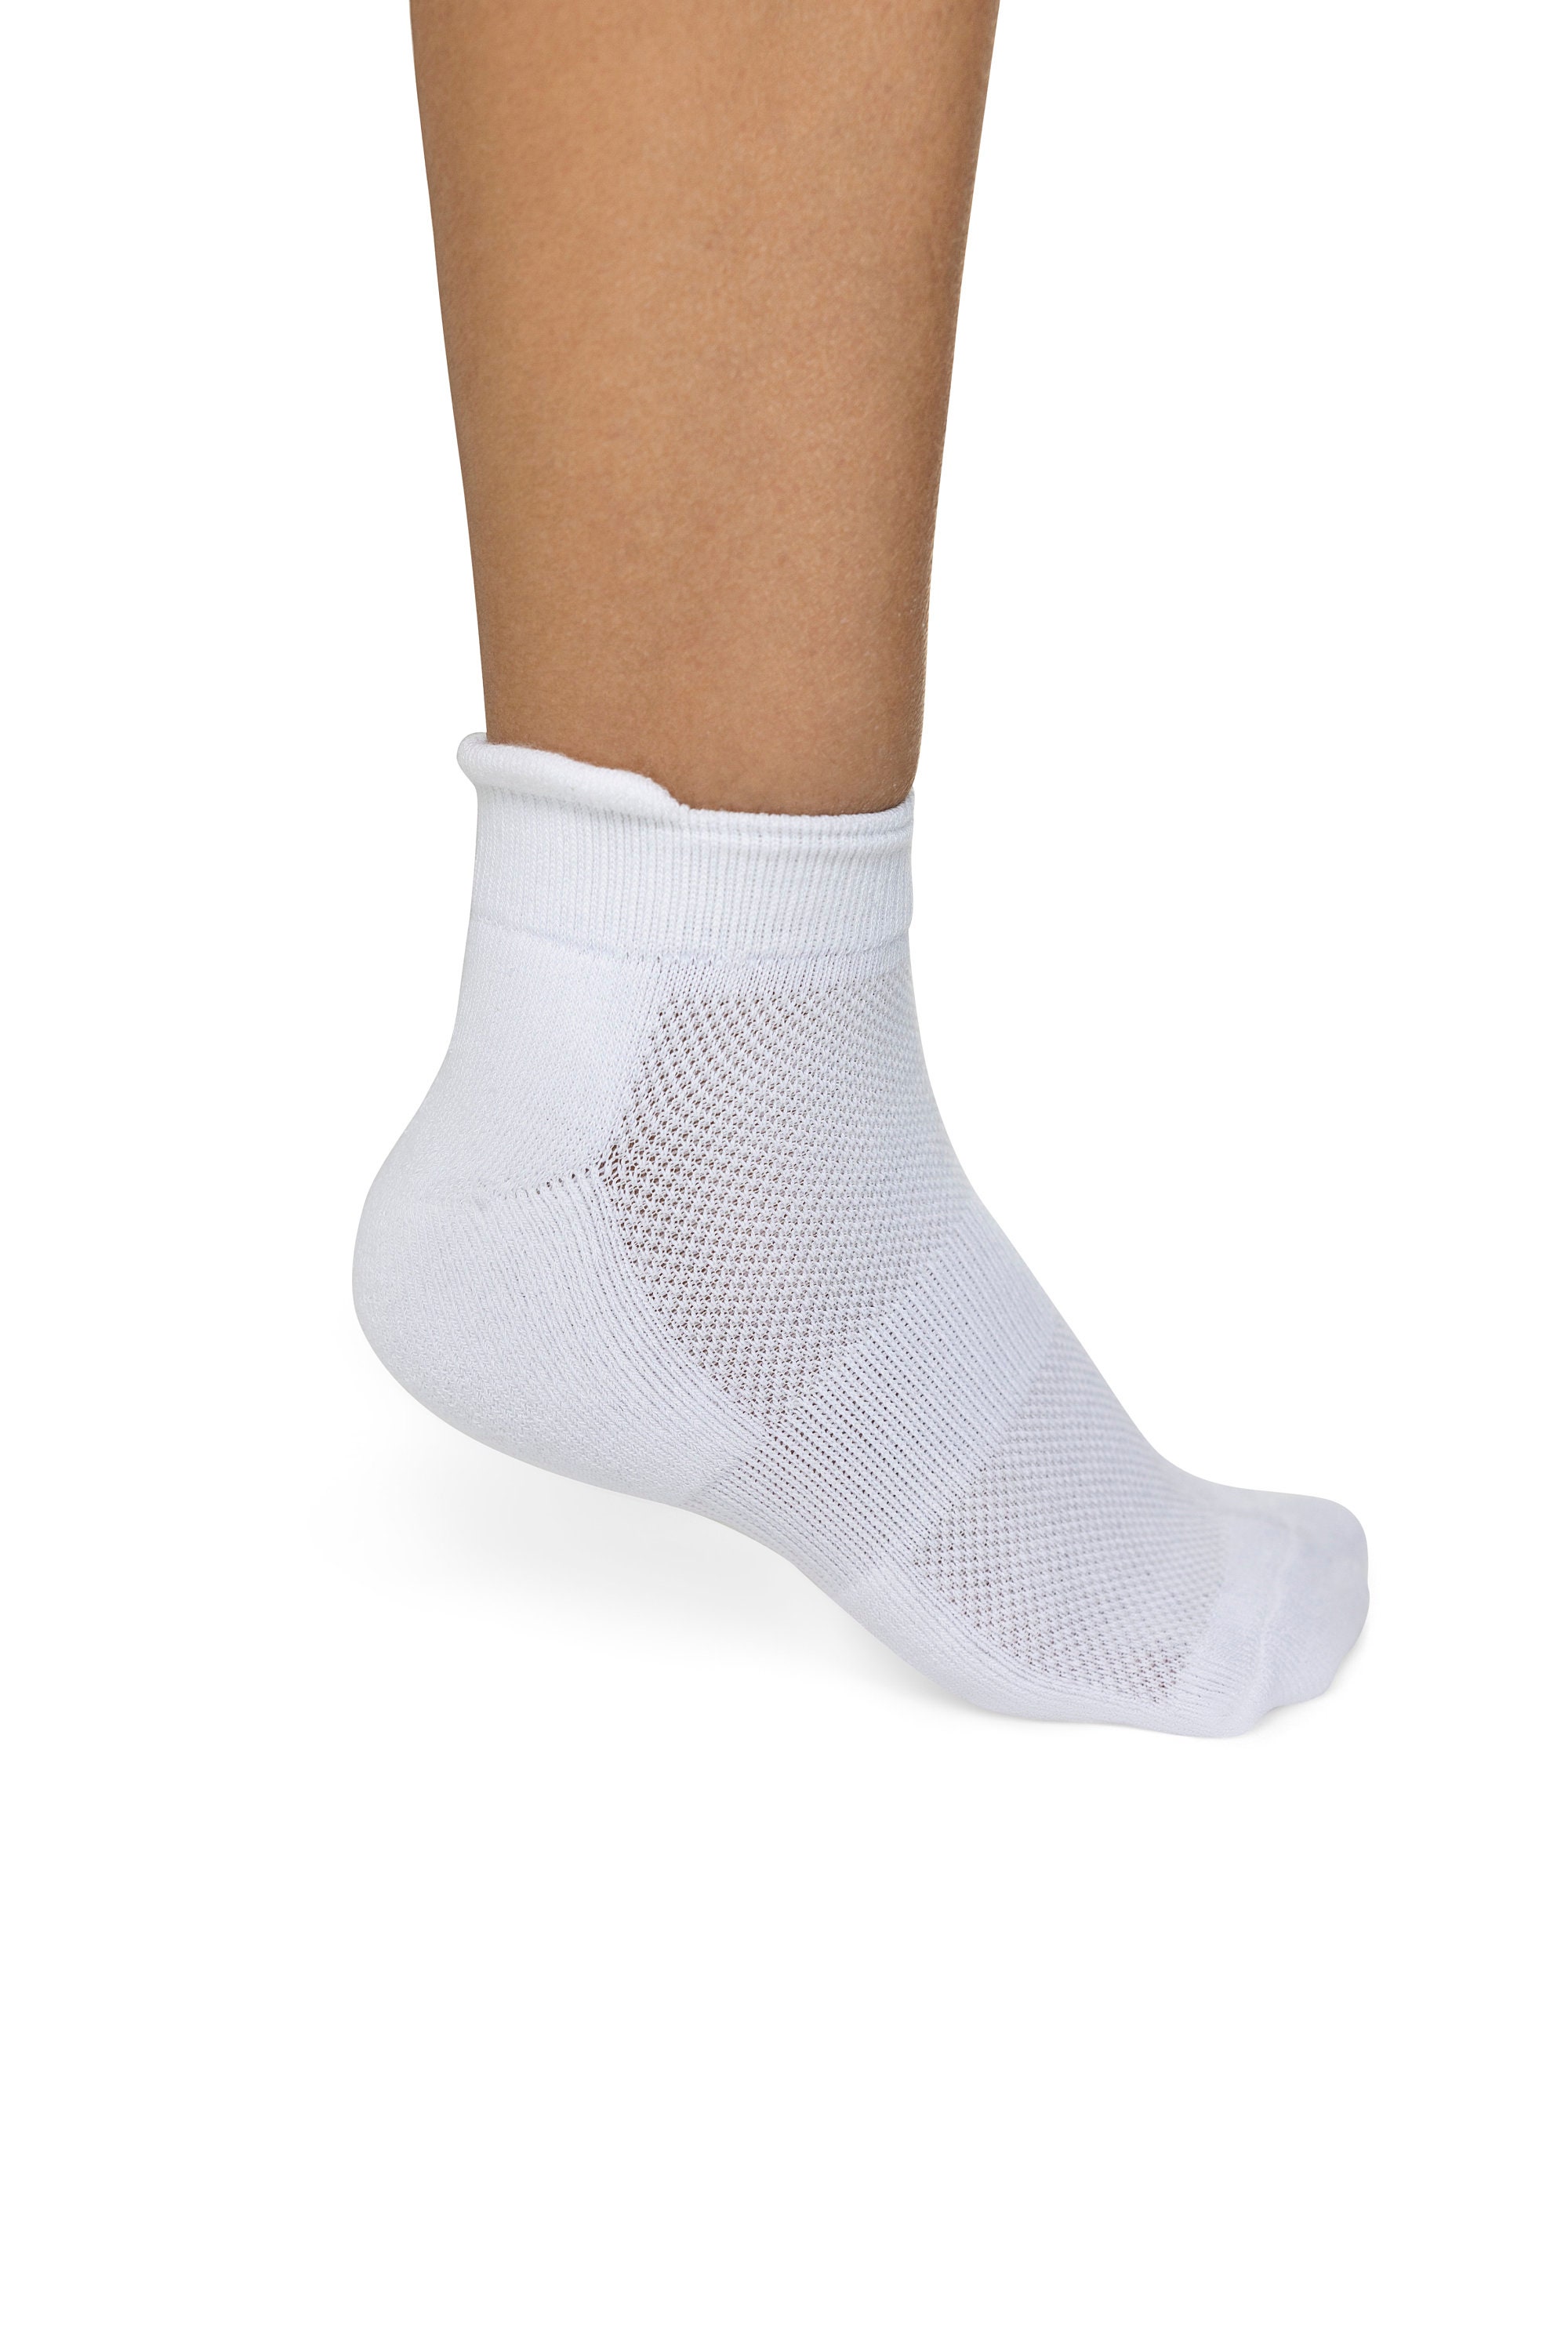 VWELL Cotton Toe Socks Ankle Athletic Running Socks Low Cut Five finger  Sports Socks 4 Pairs Size 7-10 : : Clothing & Accessories